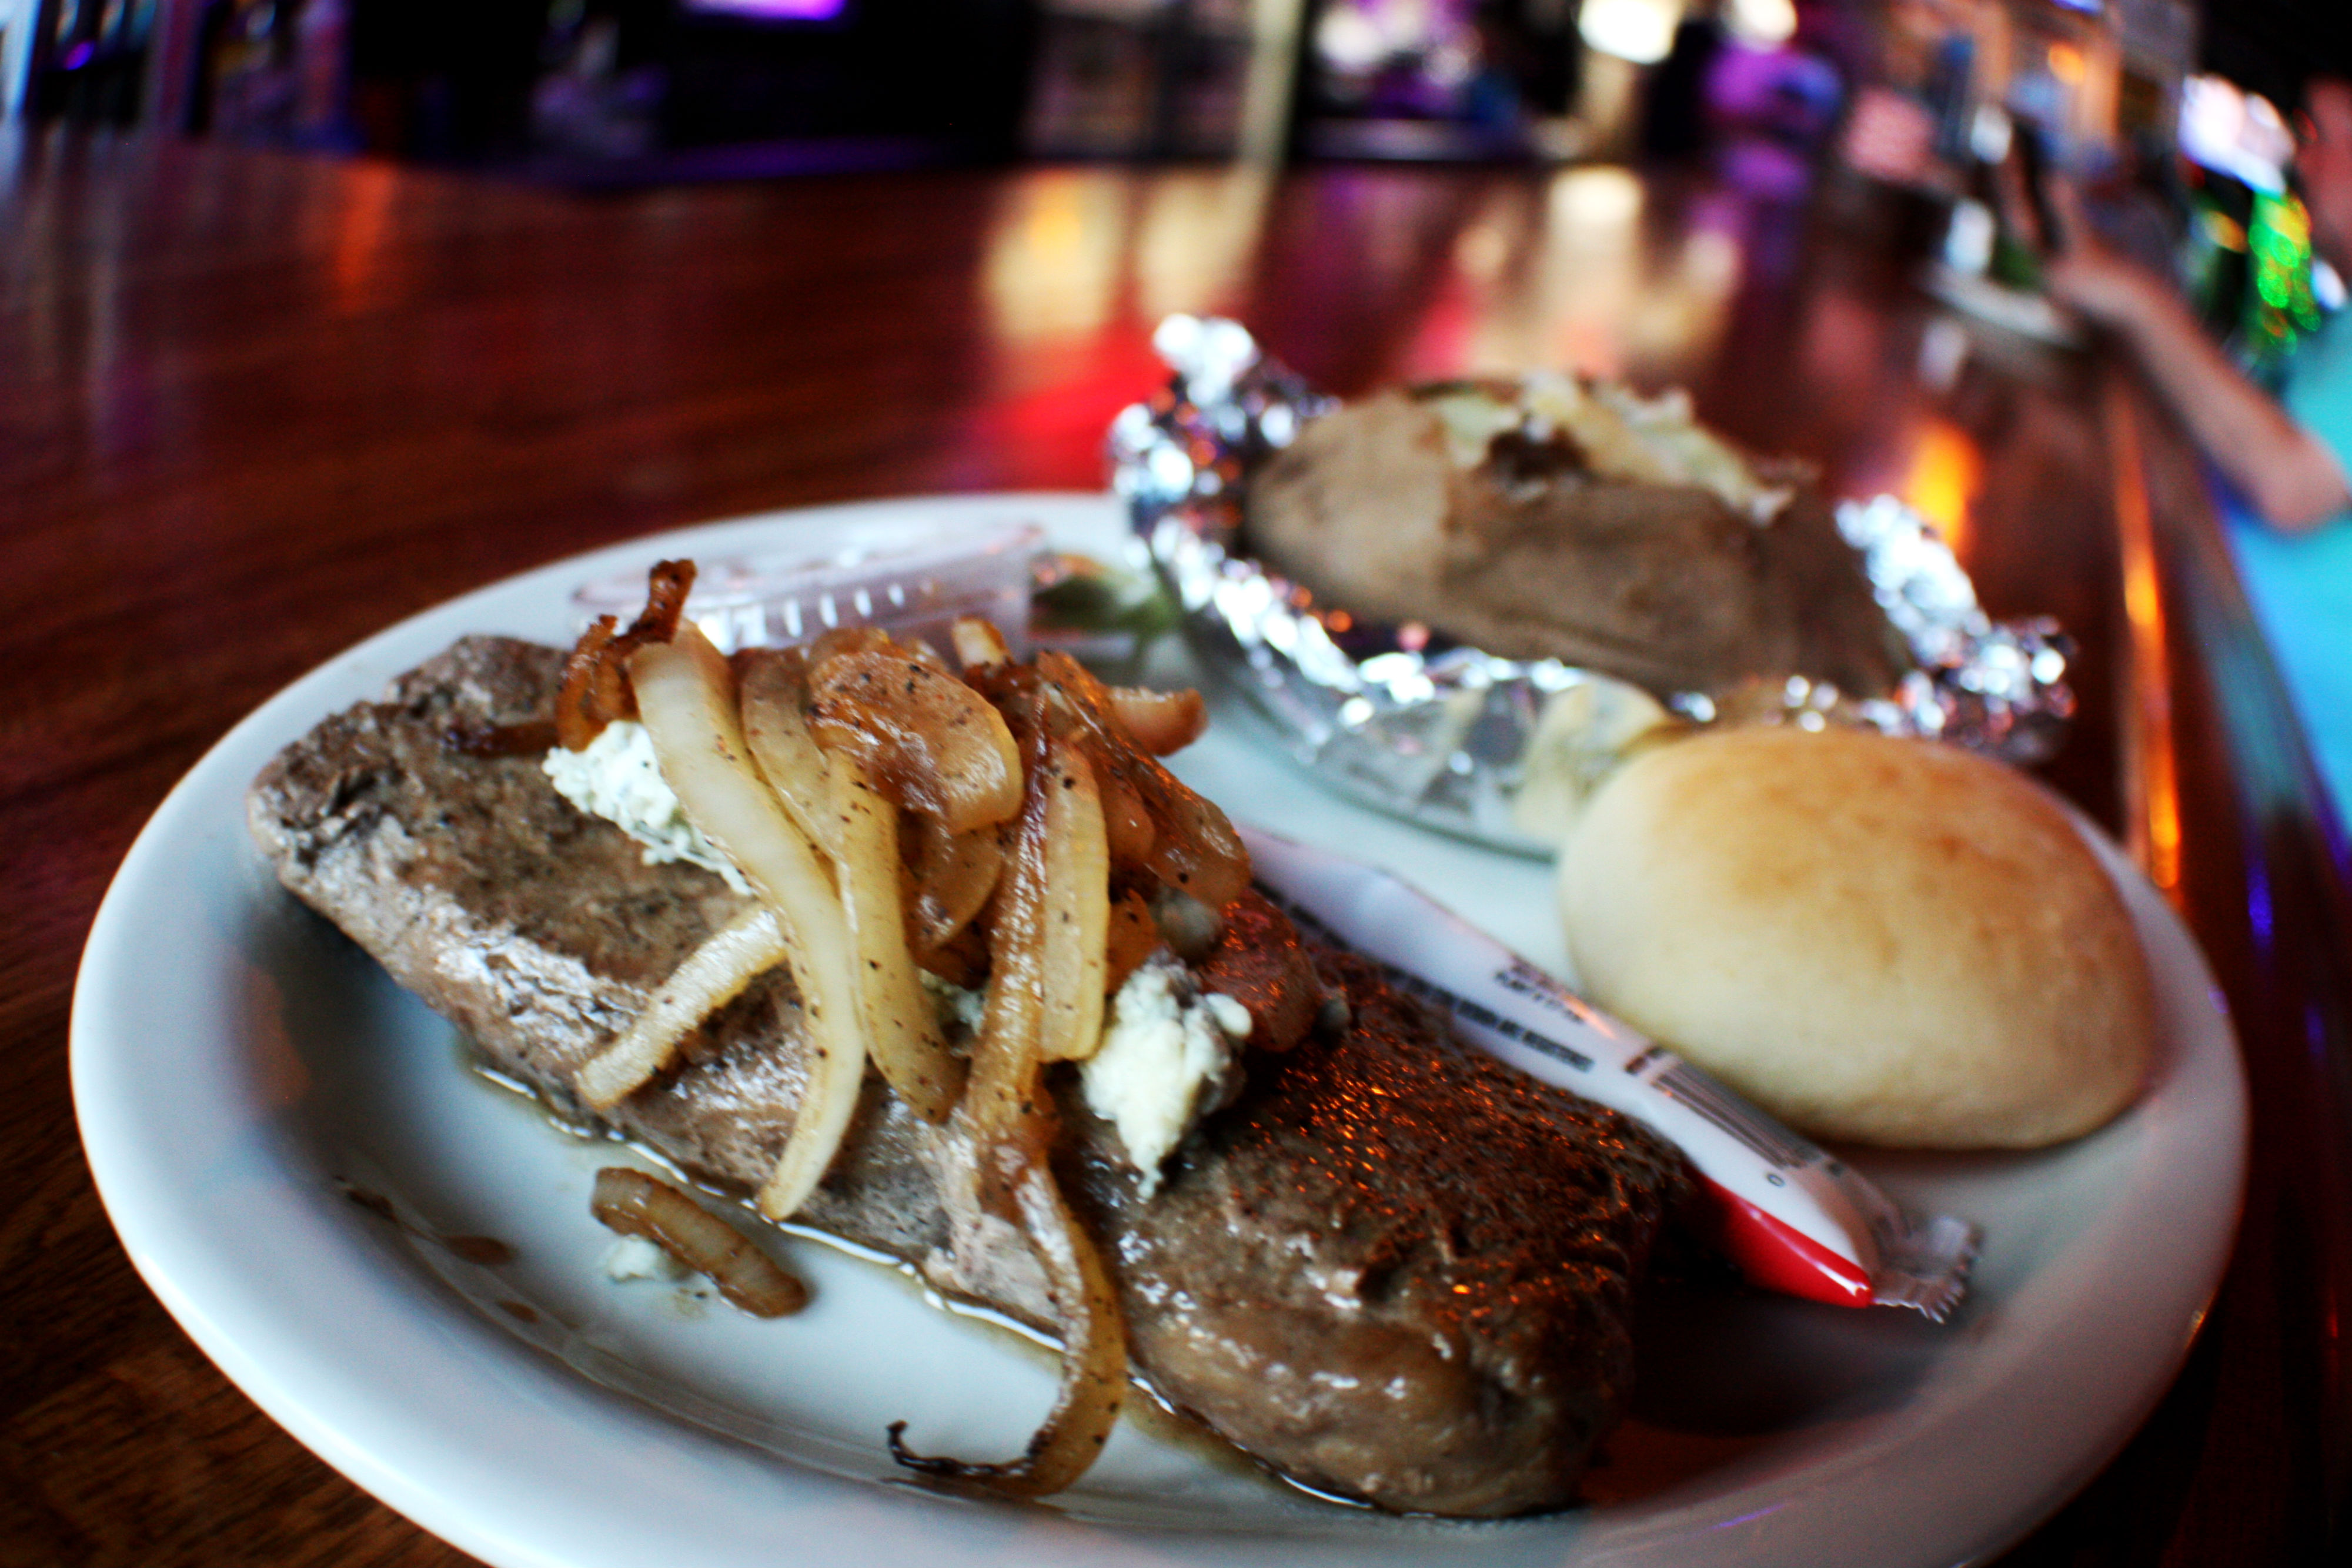 The Pumping Station has remained relevant with themed events and special offers. Wednesday night is steak night. An eight ounce steak topped with grilled onions and blue cheese served with a loaded baked potato and side salad is $15. (Cole Bradley)